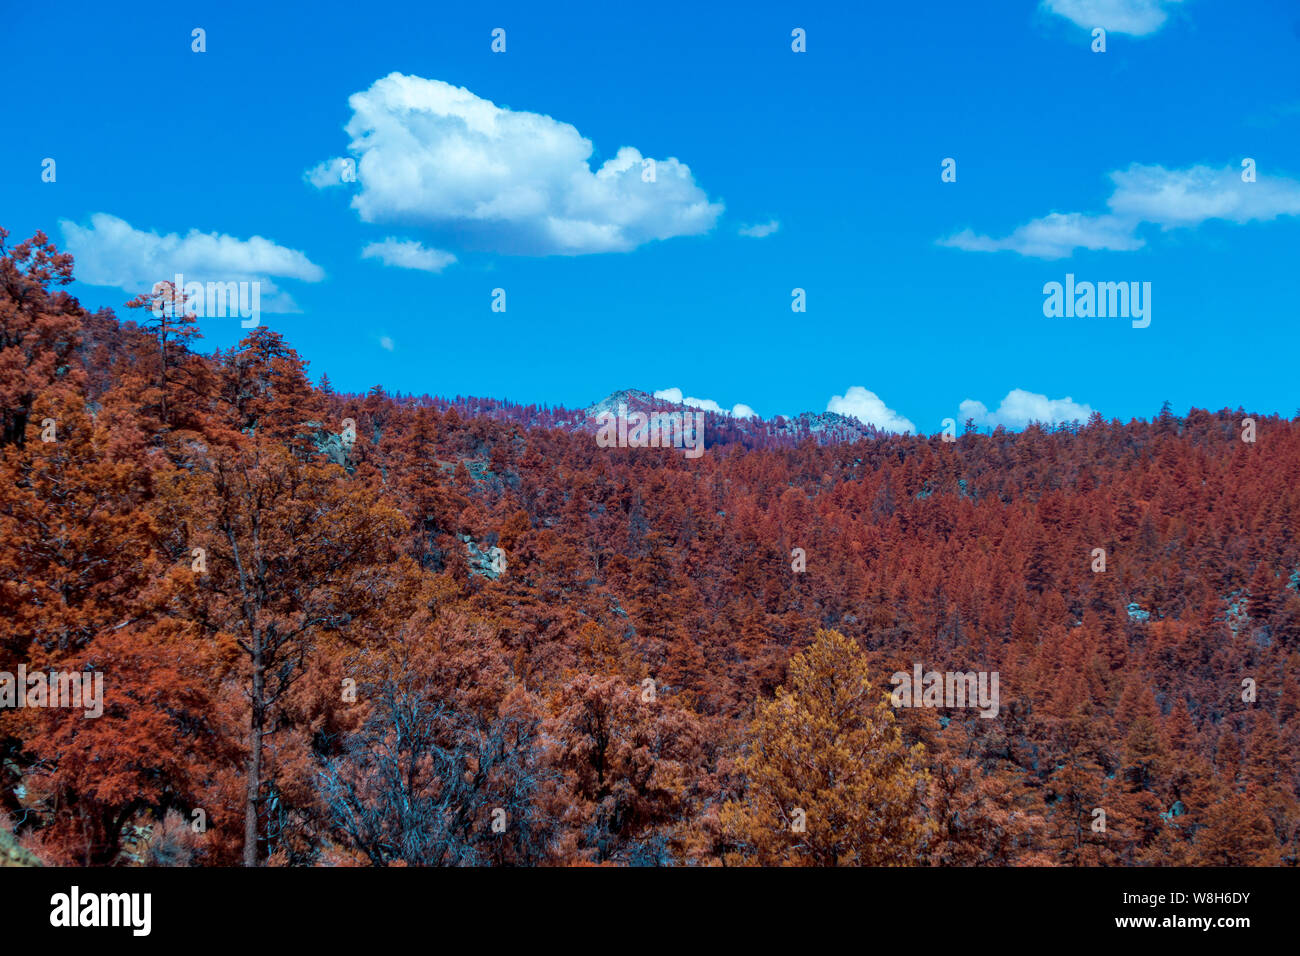 Mountain side covered in fall foliage and trees under bright blue sky with white clouds. Stock Photo